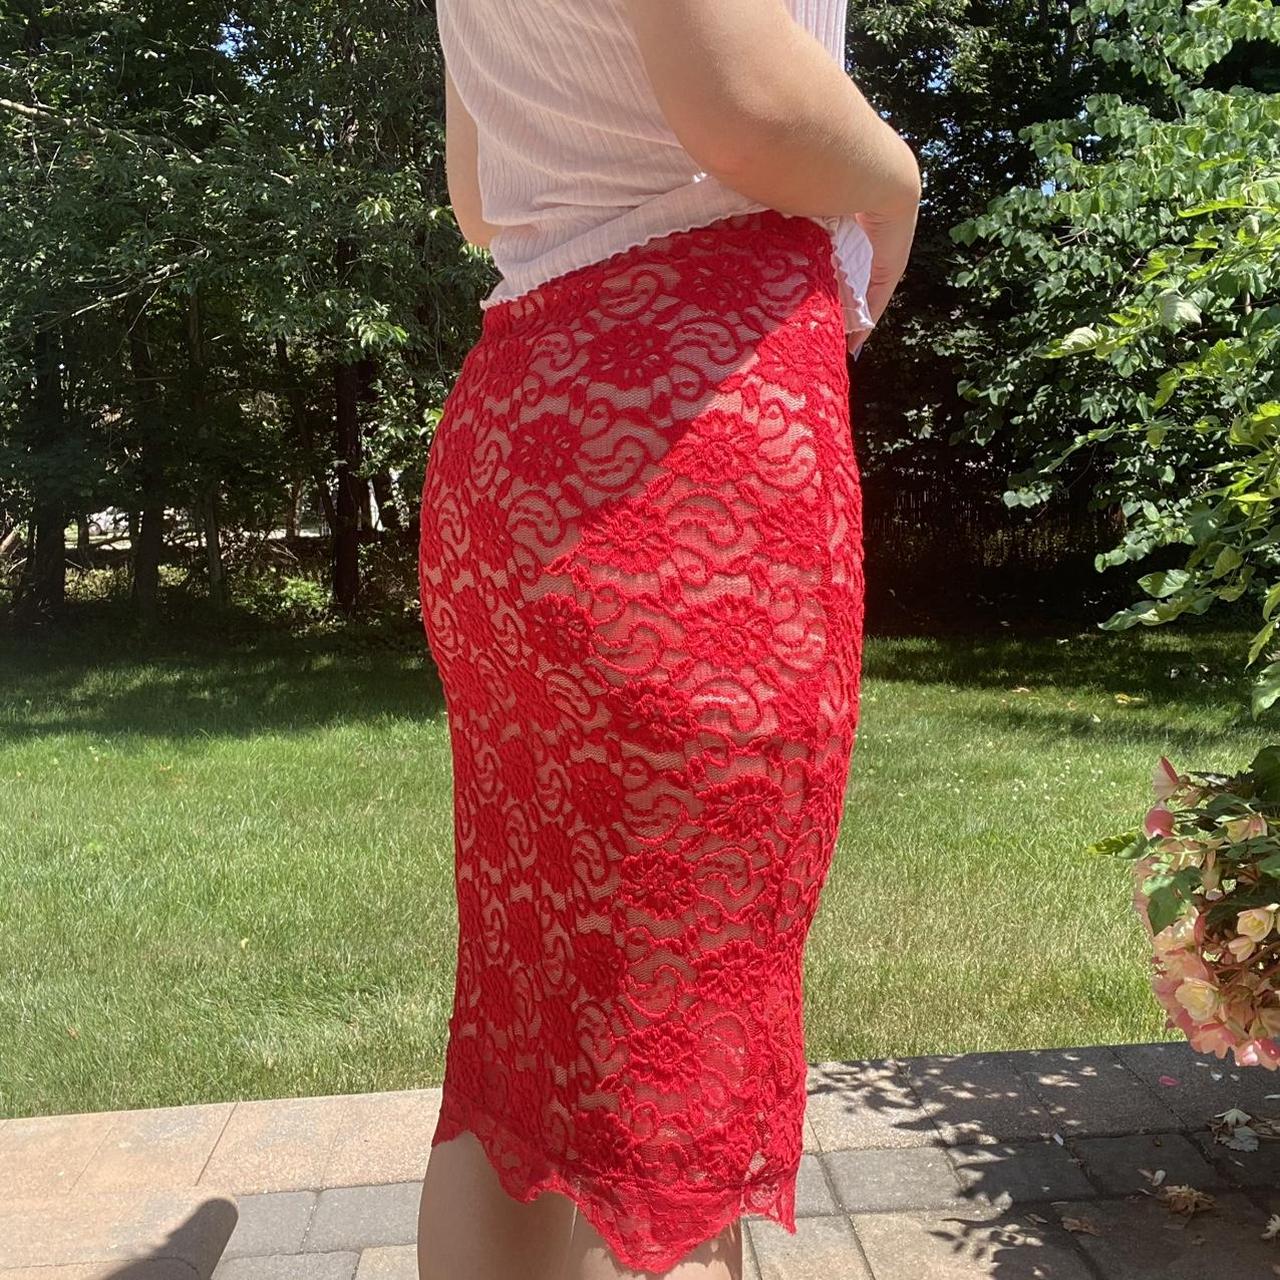 Red Lace Skirt ️ Nude Lining Size Small Slightly Depop